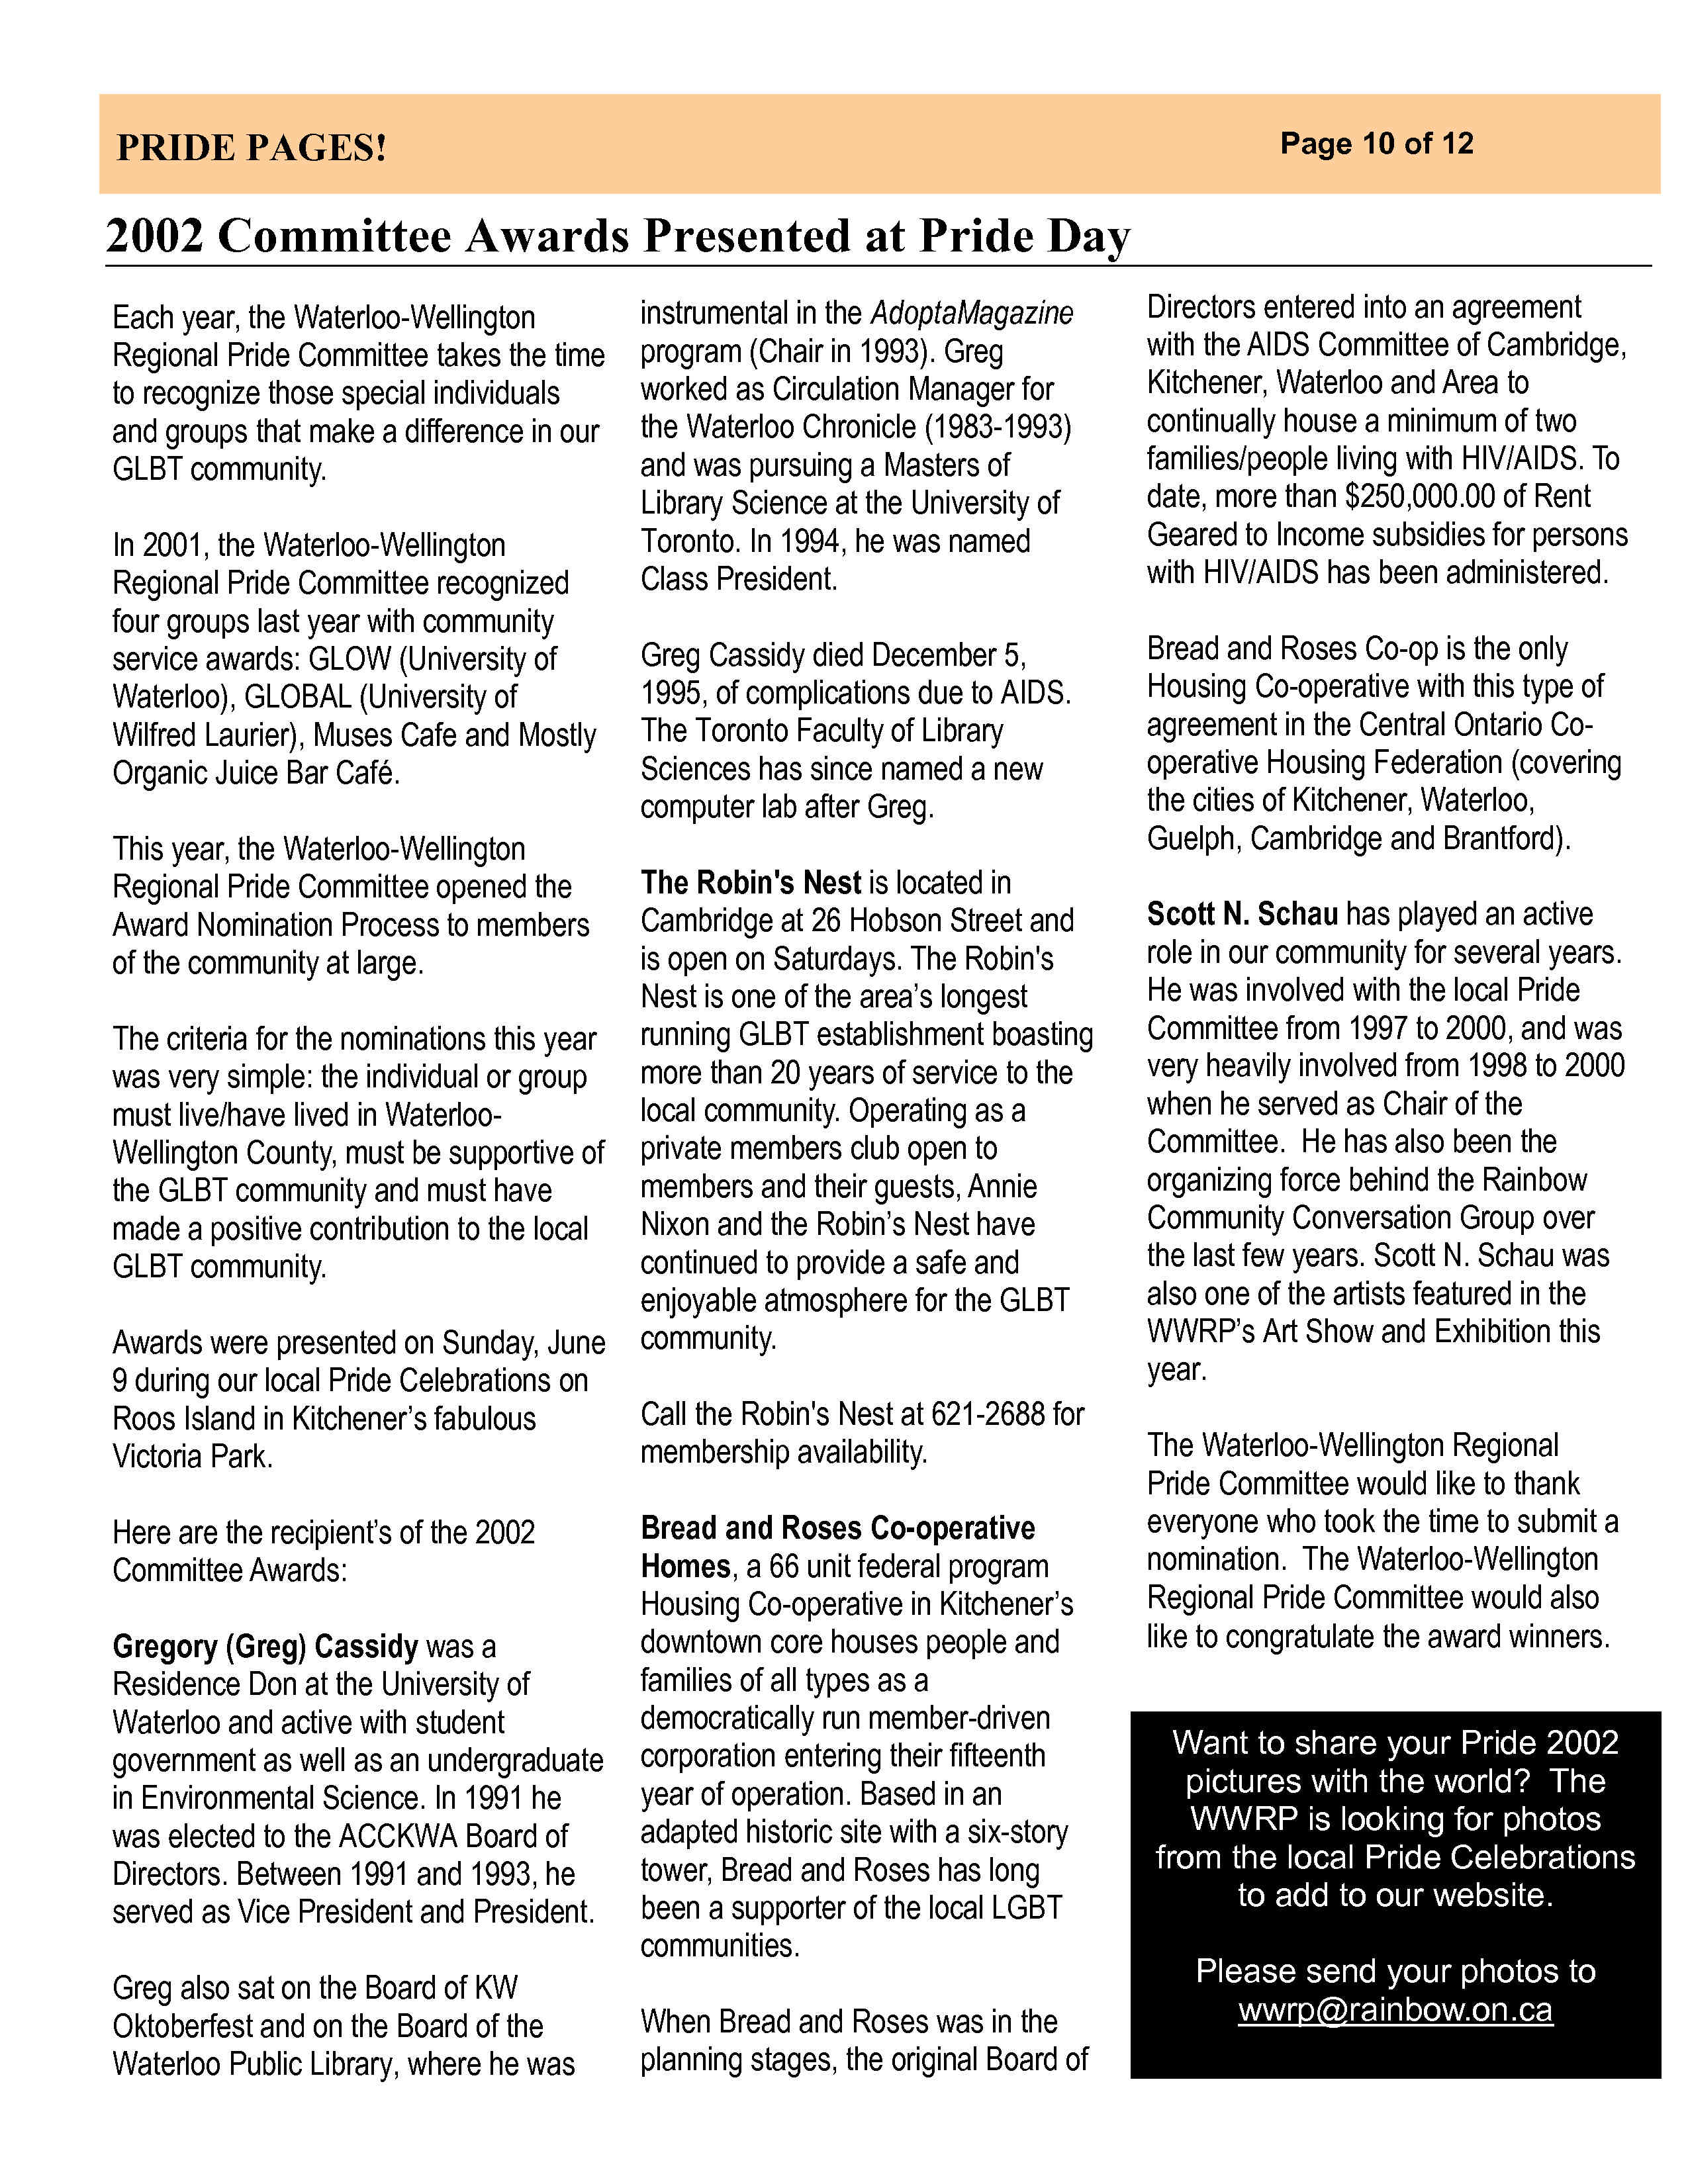 Pride Pages 2002-07 p10